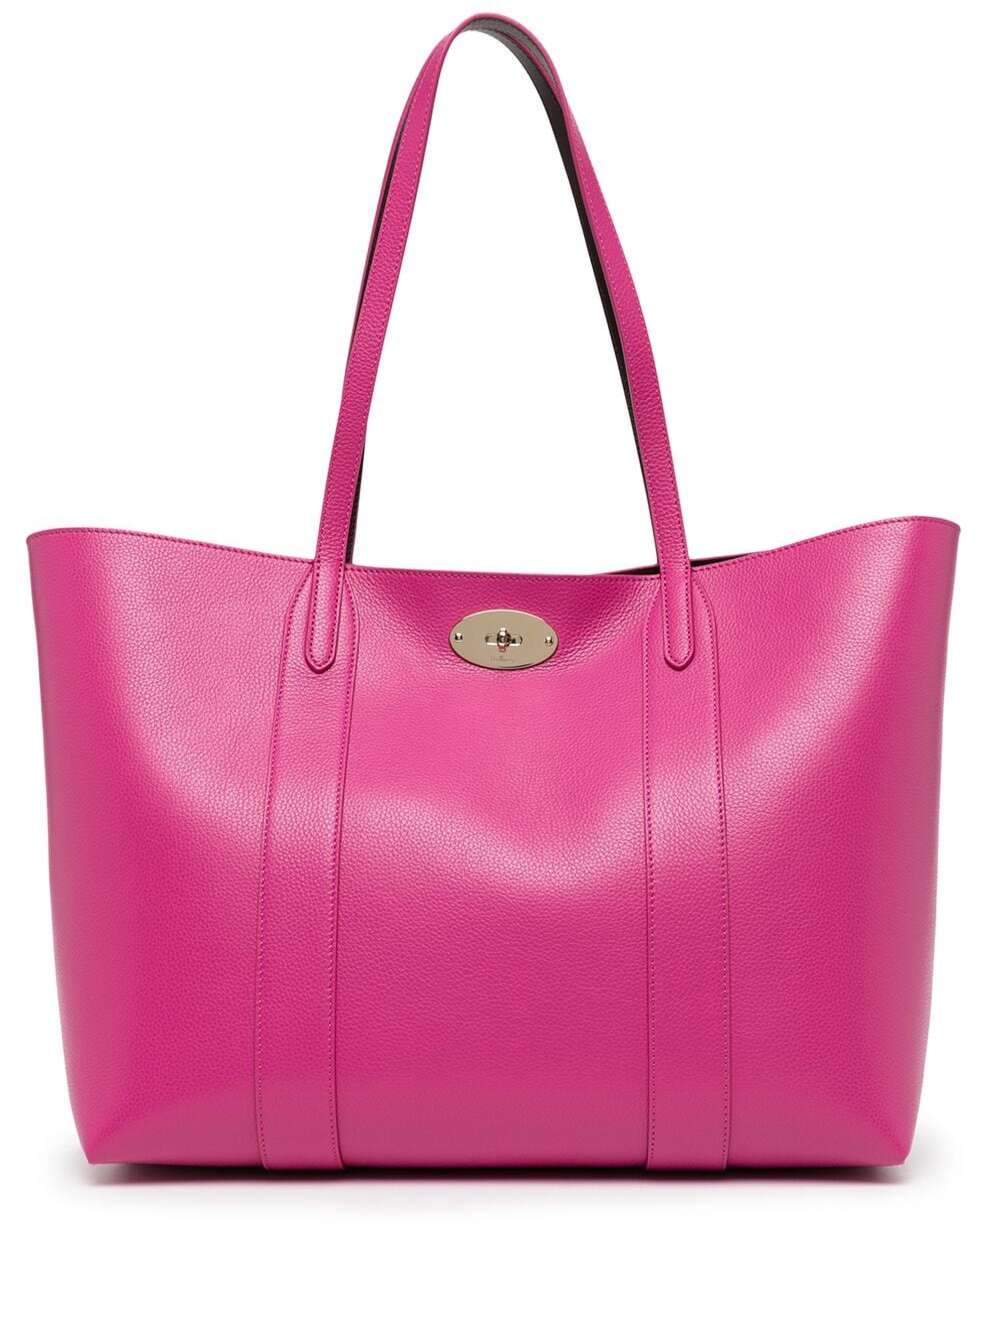 MULBERRY BAYSWATER TOTE SMALL CLASSIC GRAIN